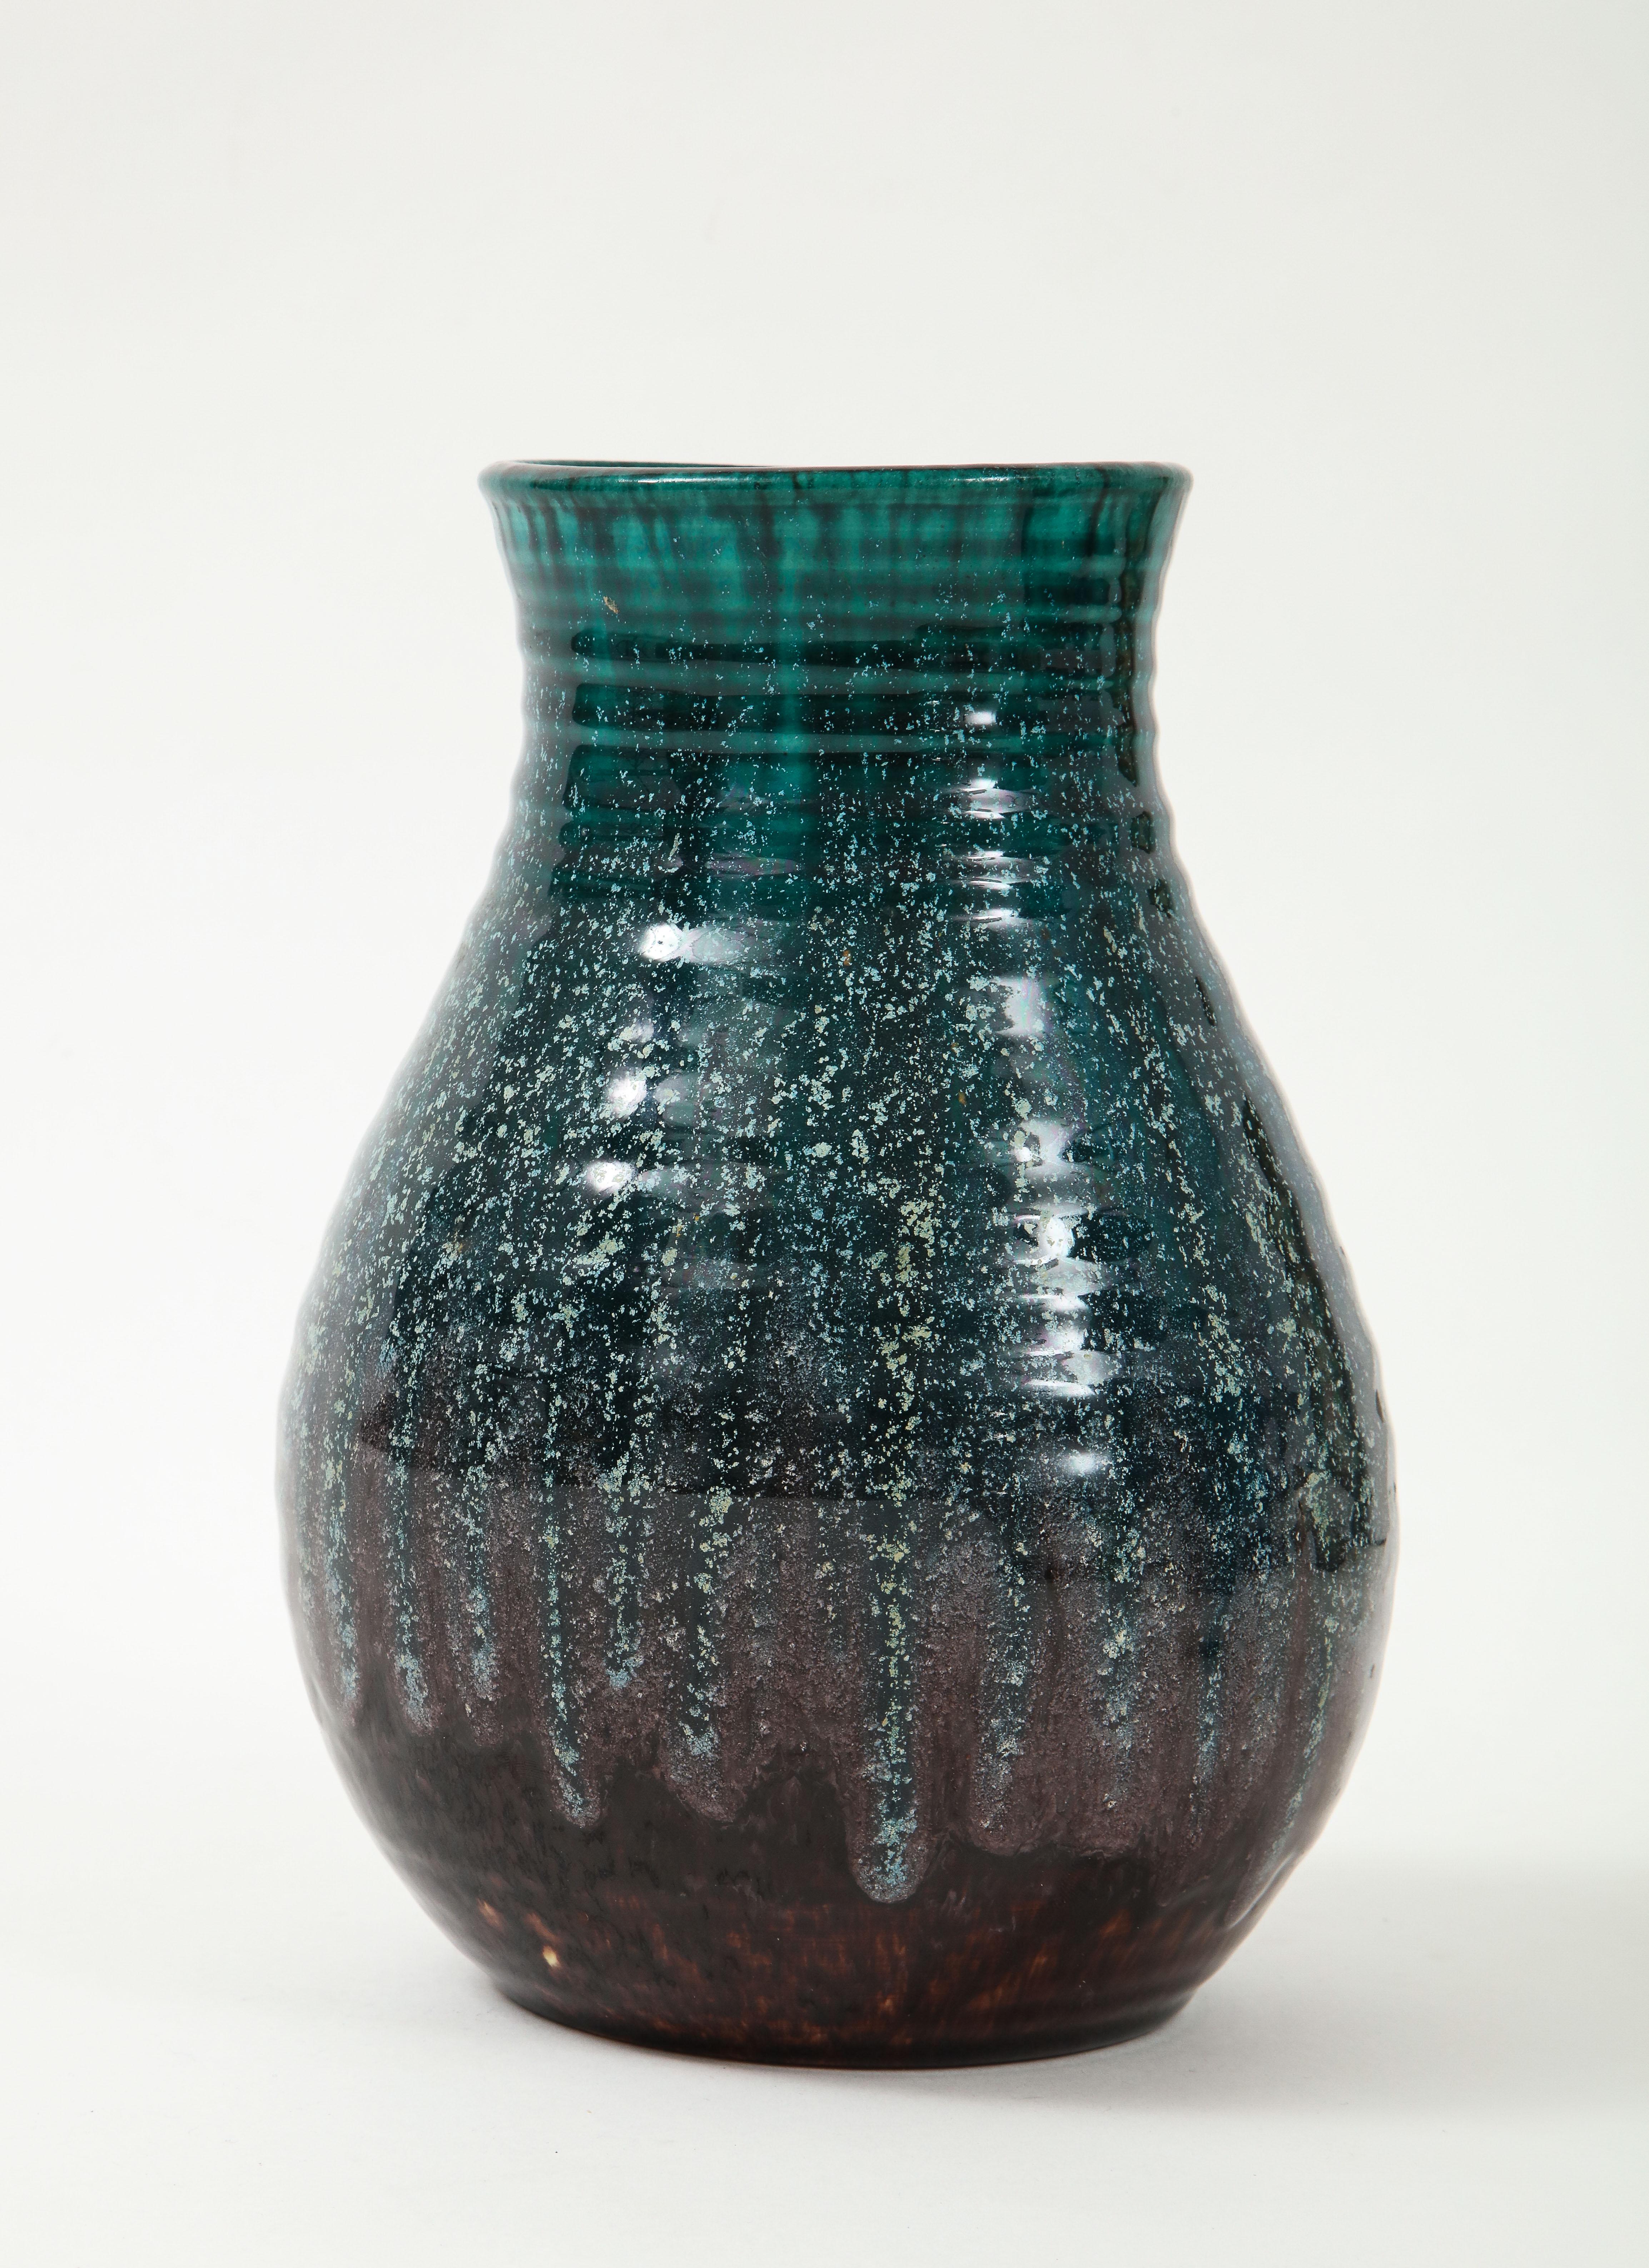 A unique vase produced by Accolay Pottery in France. One of many pieces of Accolay in our inventory, we love this accent piece for its form and beautiful glaze.